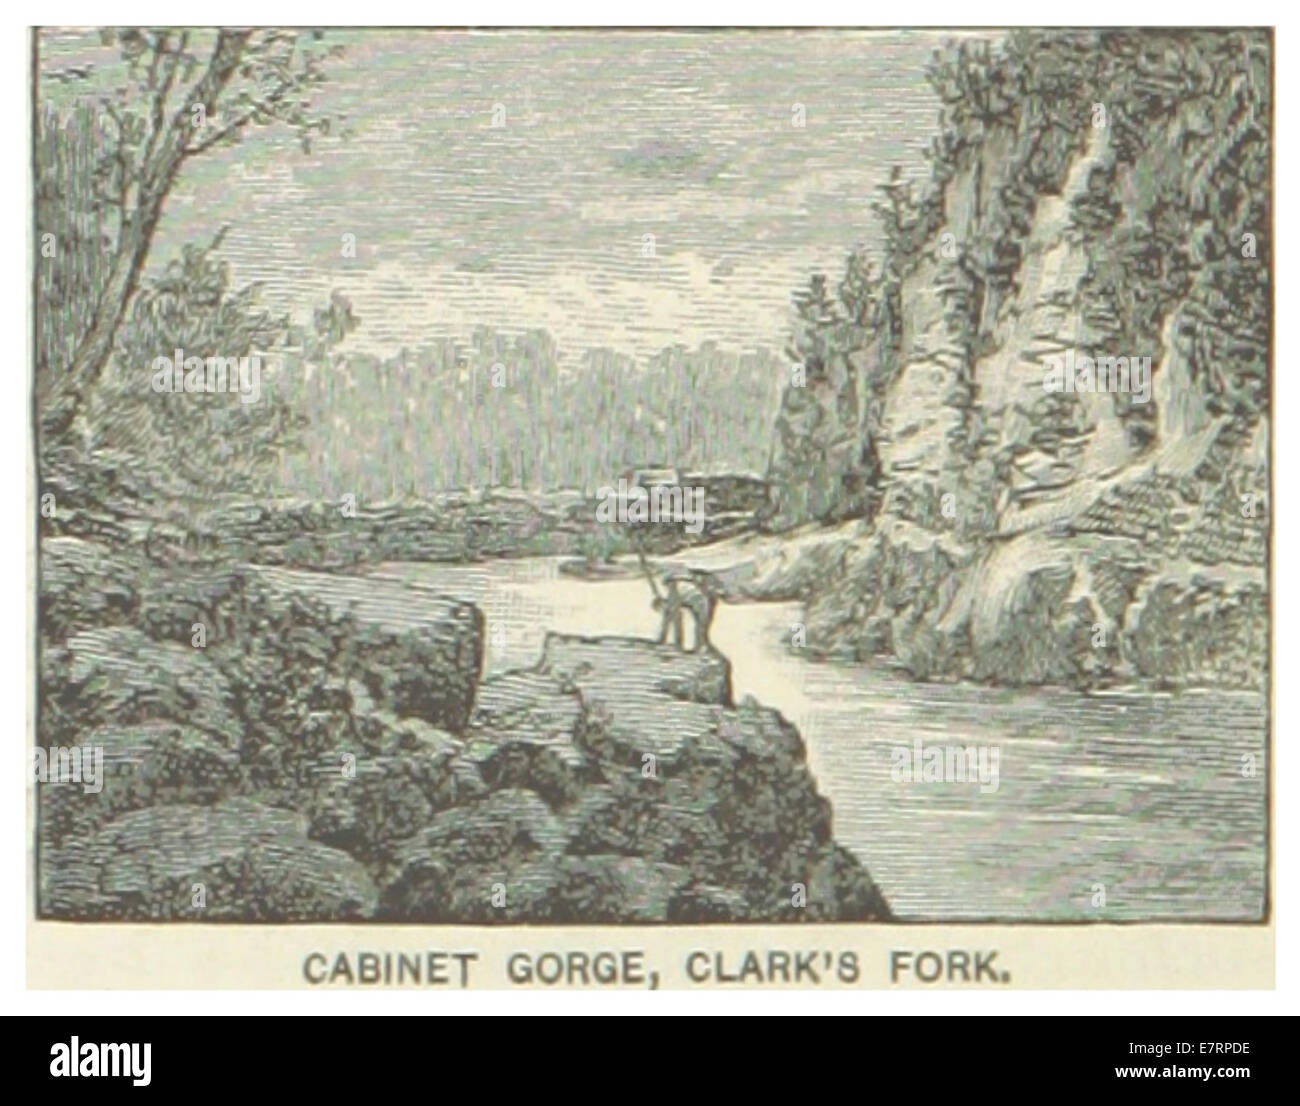 US-ID(1891) p196 CABINET GORGE, CLARK'S FORK Stock Photo